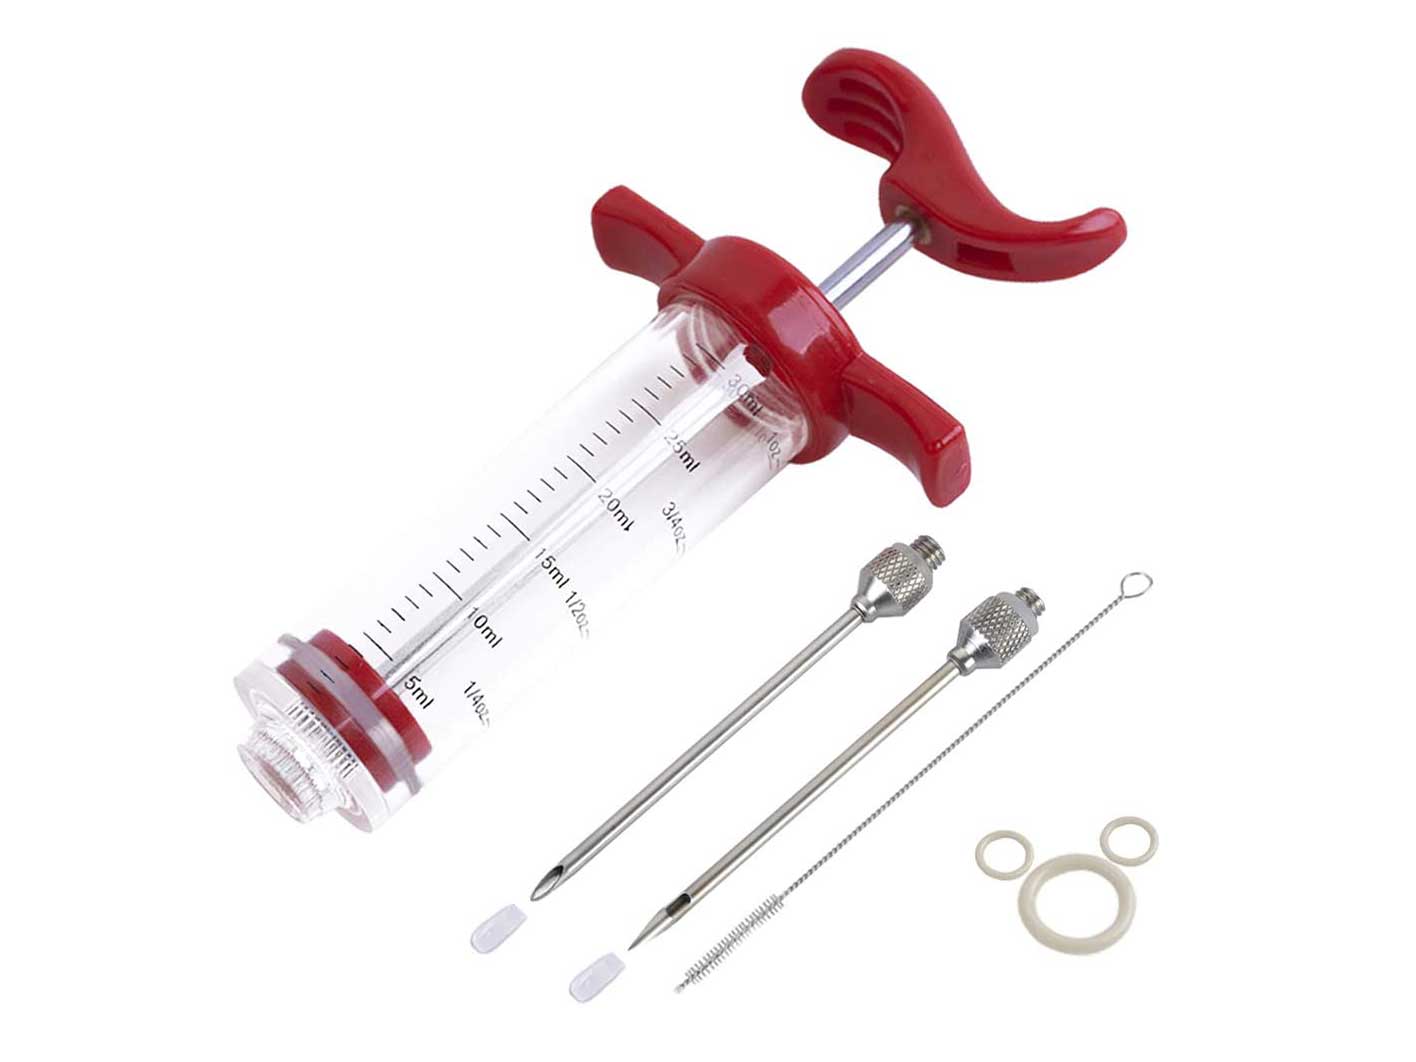 Ofargo Plastic Marinade Injector Syringe with Screw-on Meat Needle for BBQ Grill, 1-oz, Red, Recipe E-Book (Download PDF)